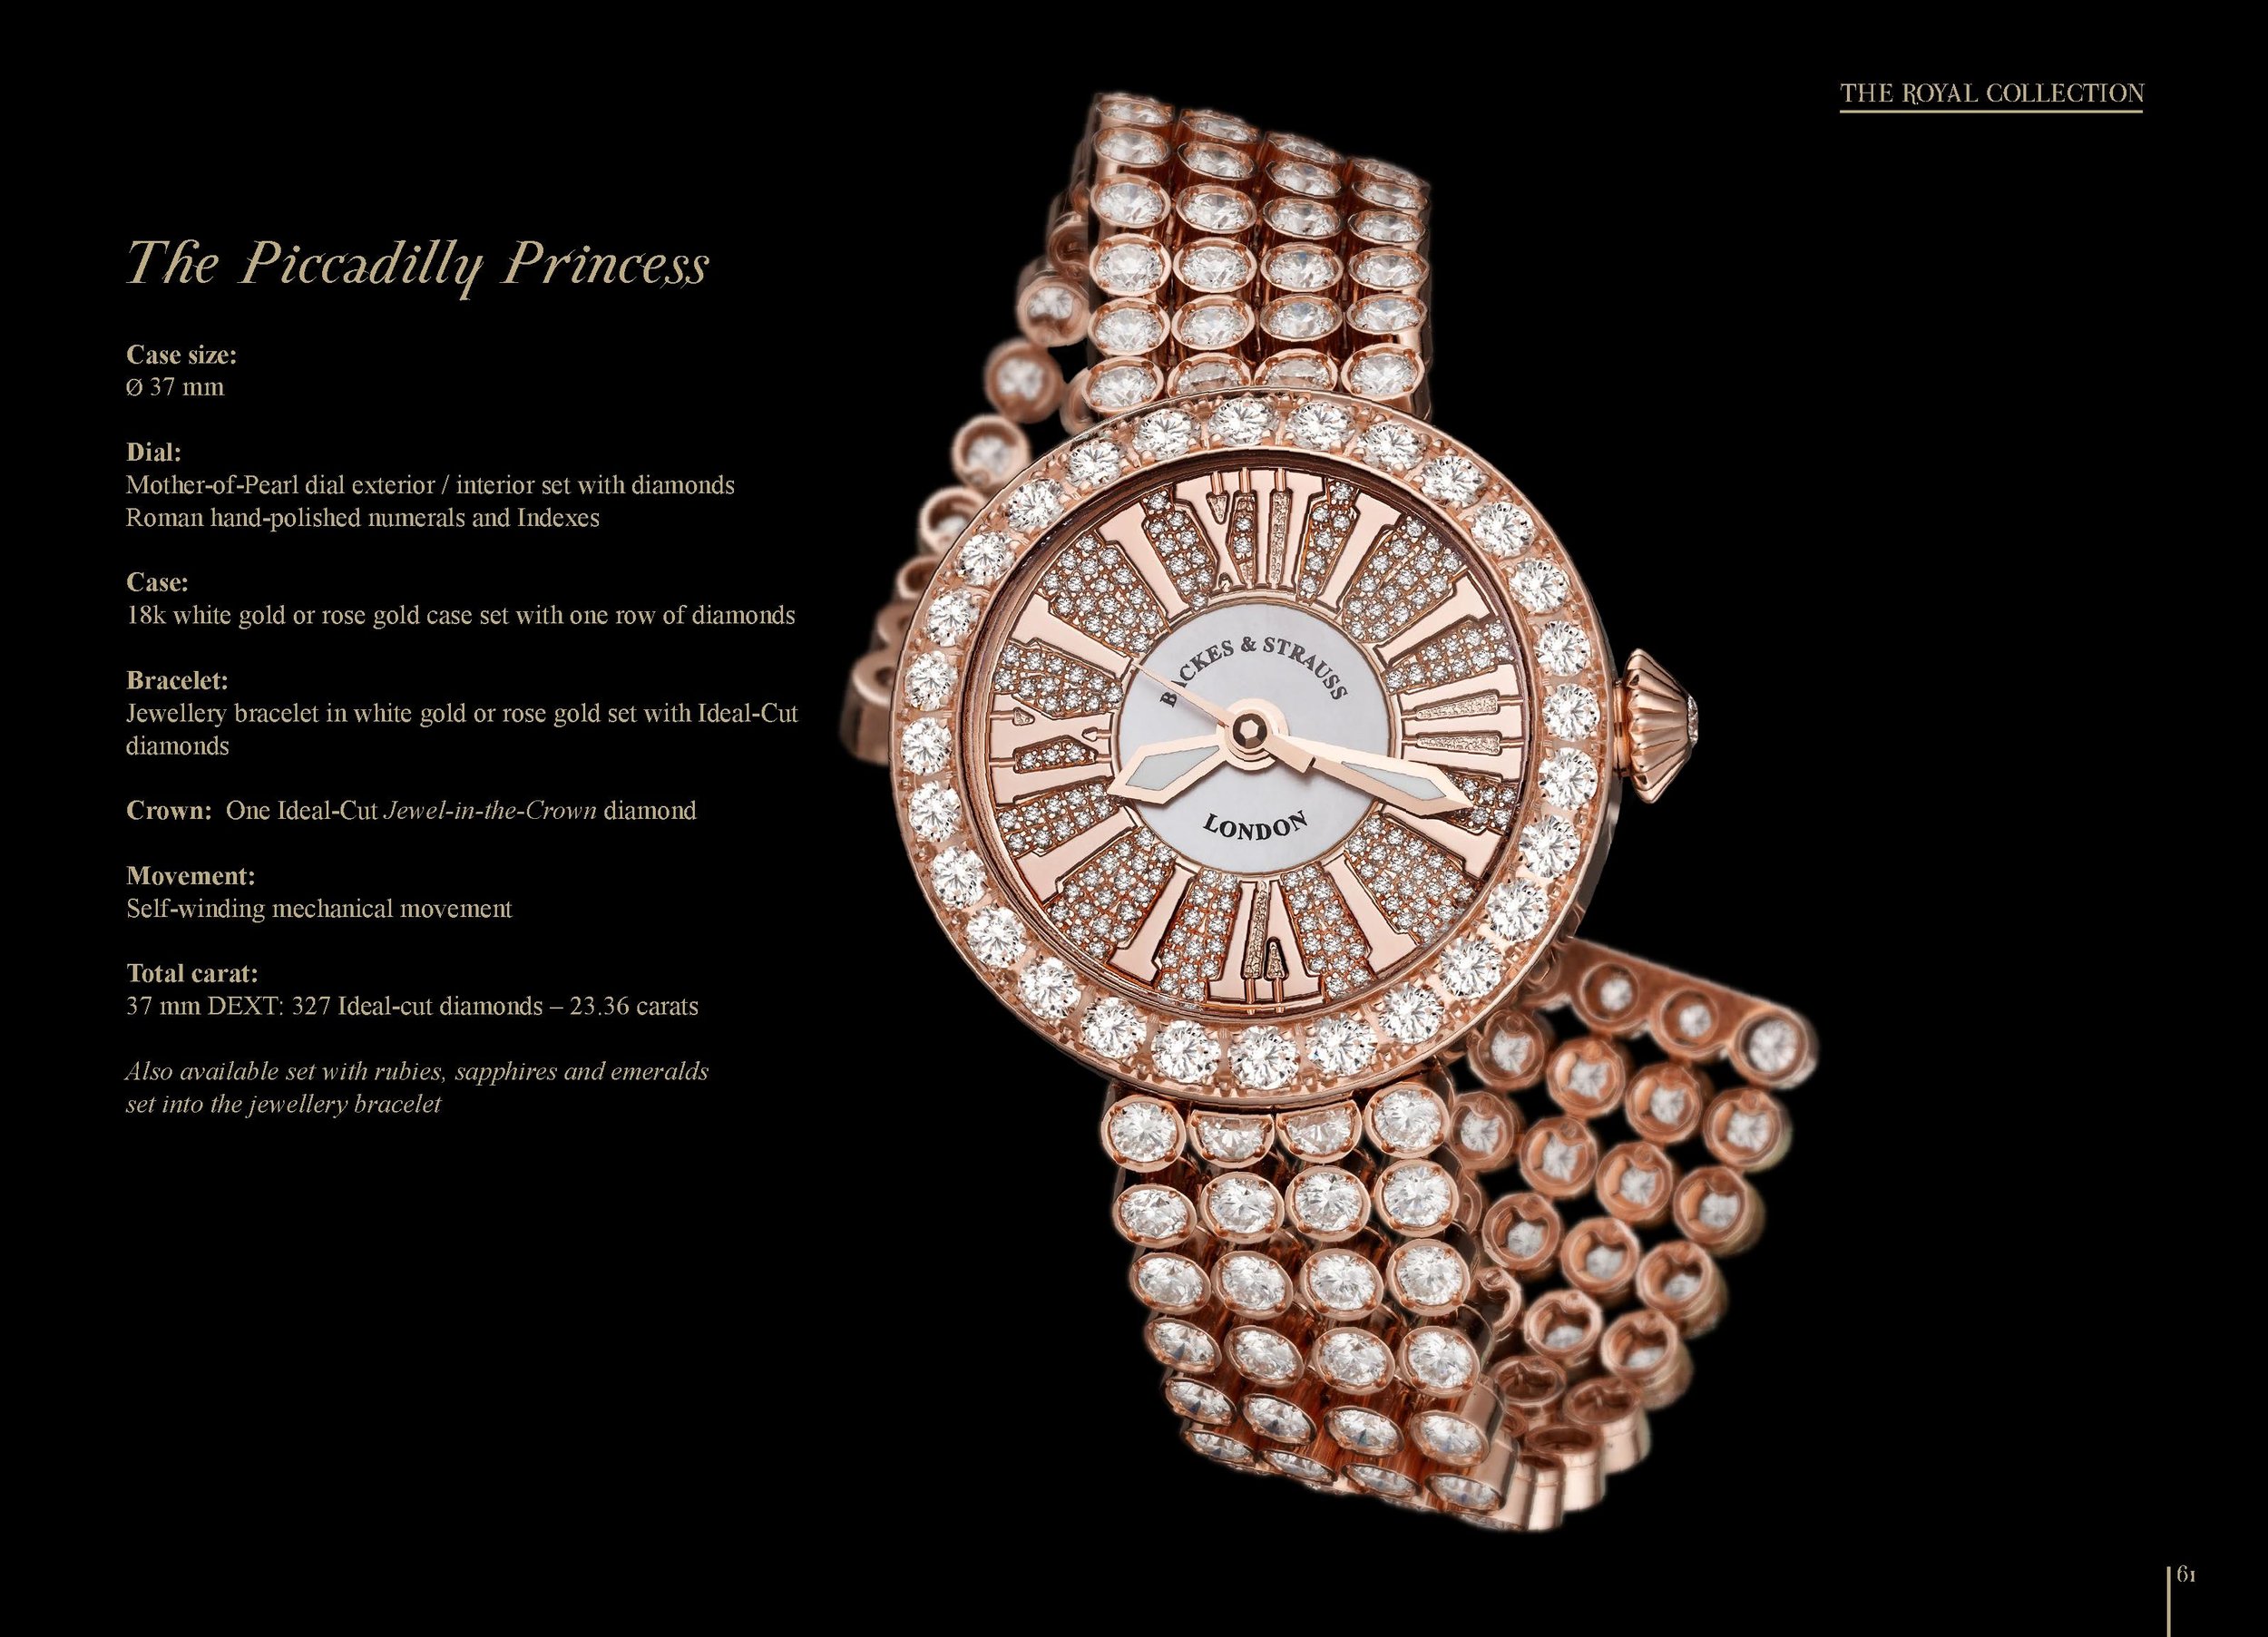 The Piccadilly Princess watch